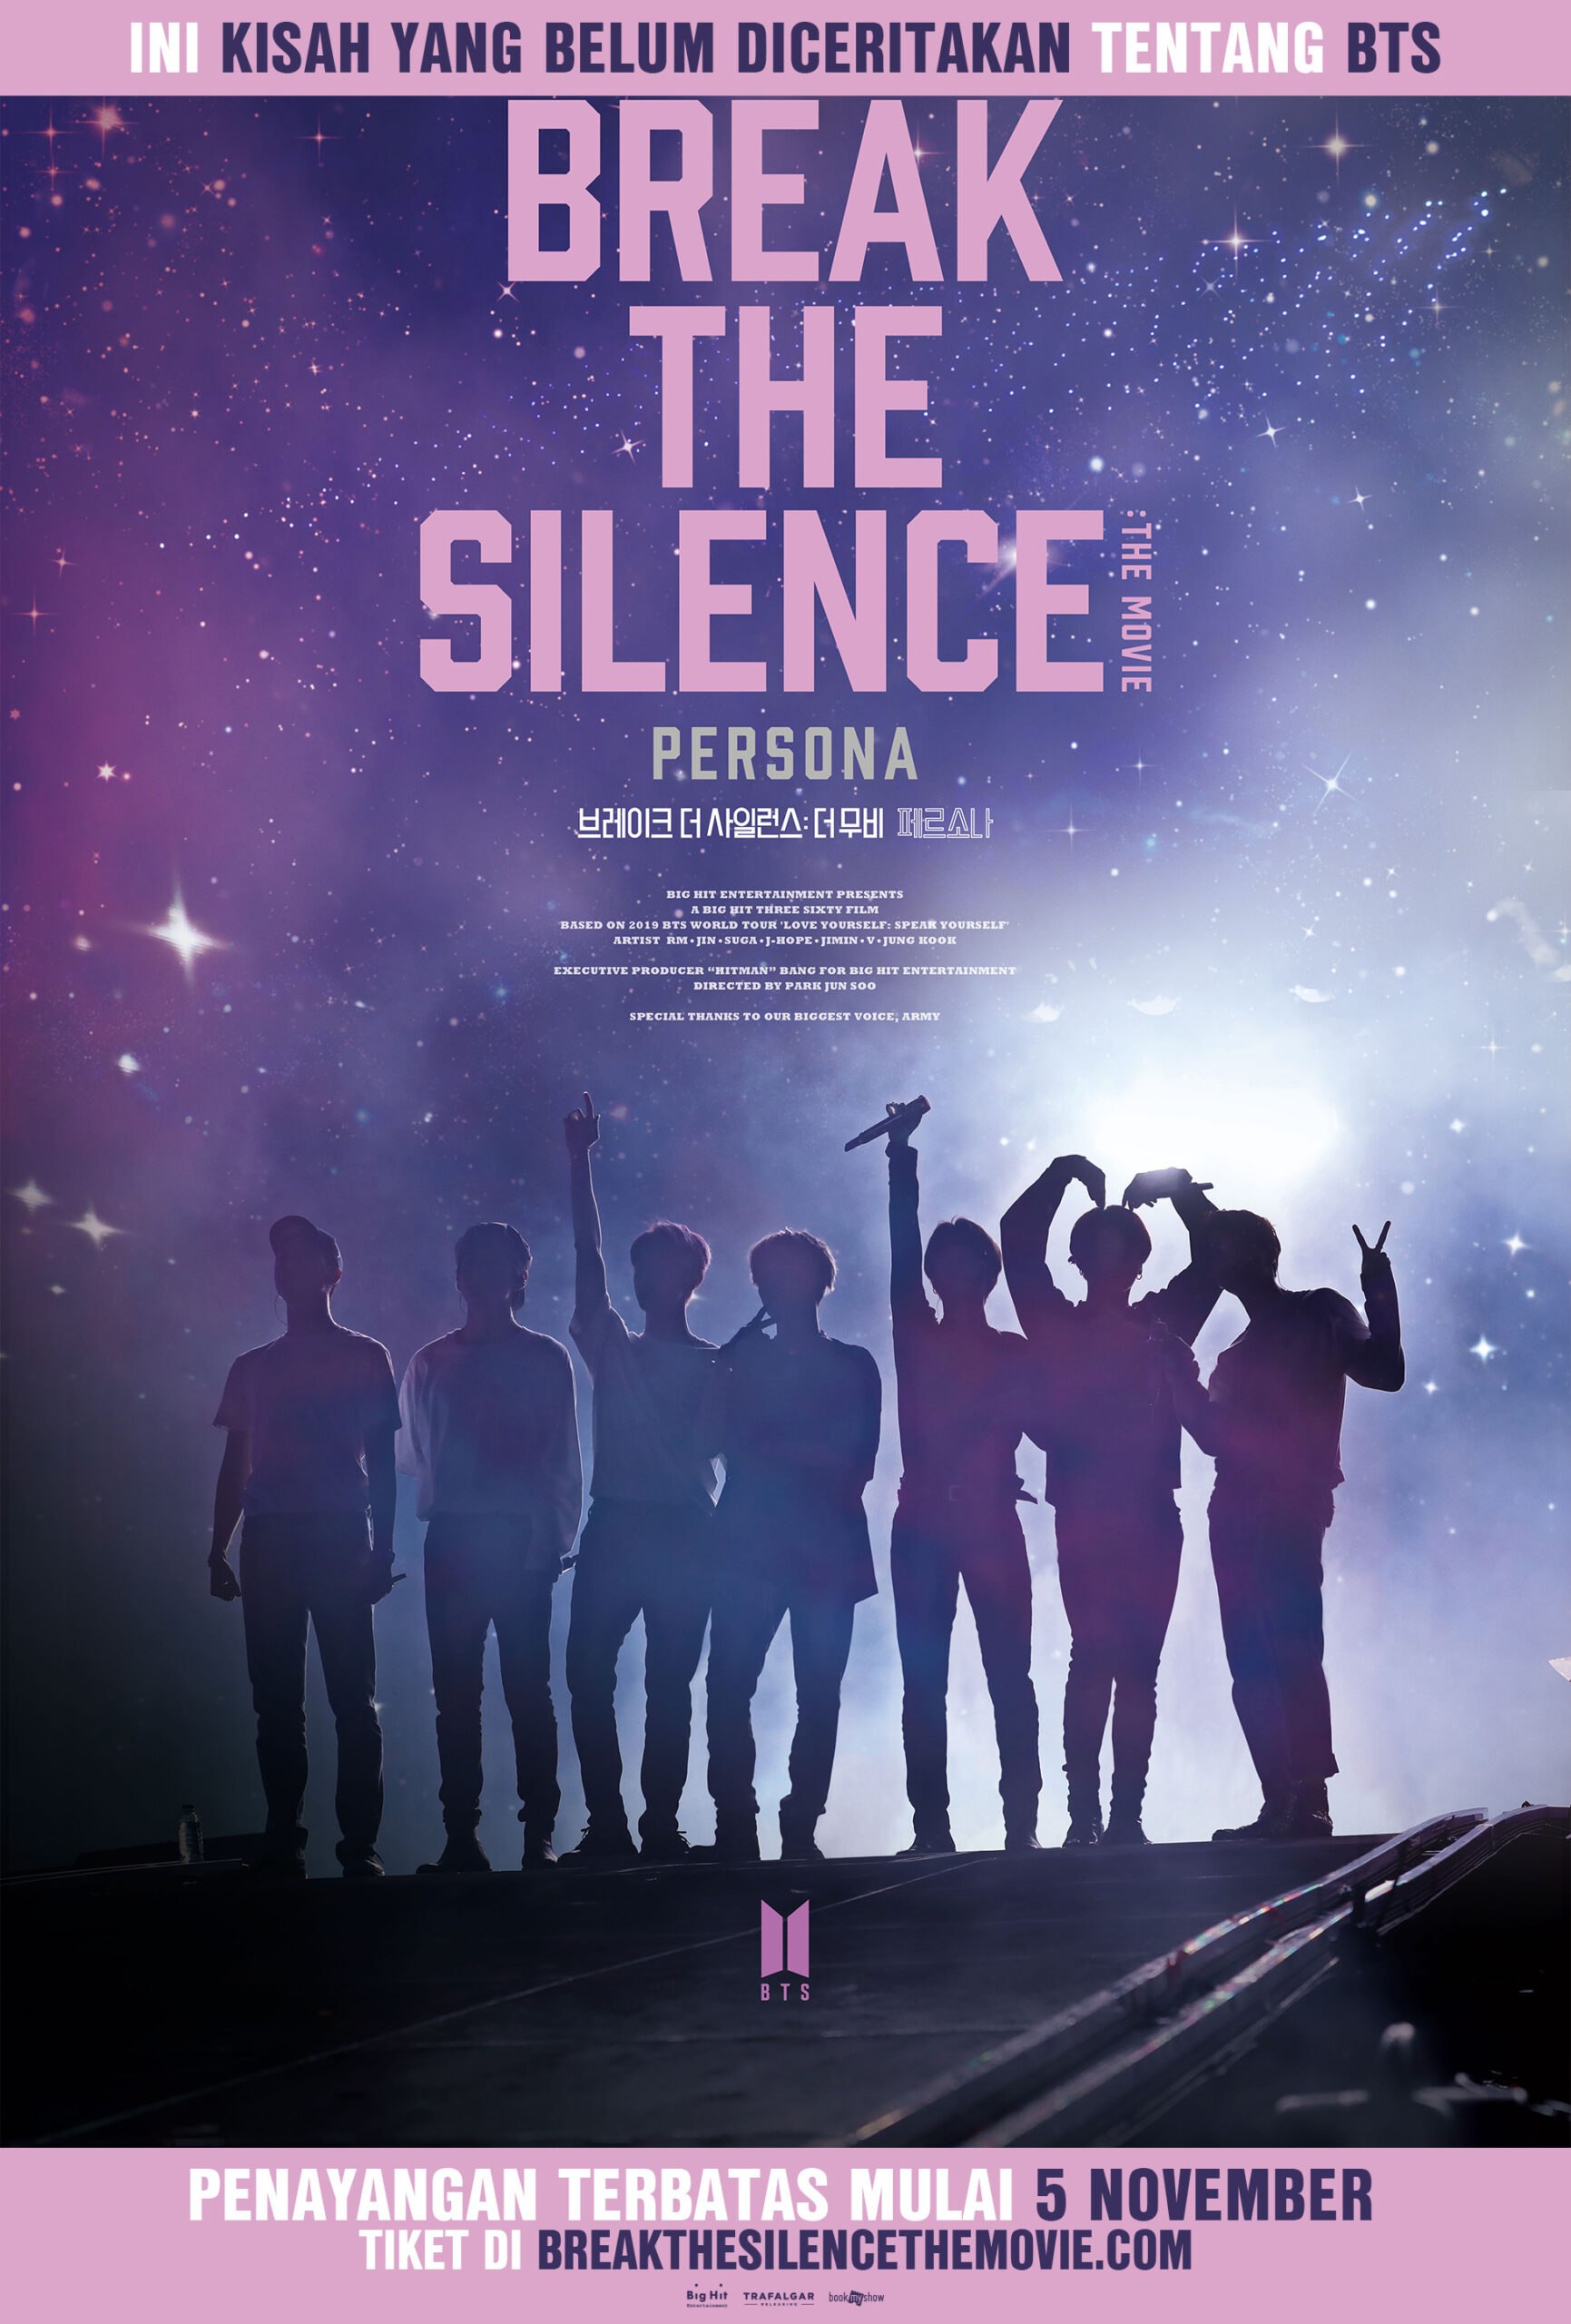 [NEWS] BTS Break The Silence: The Movie Screening in Indonesia